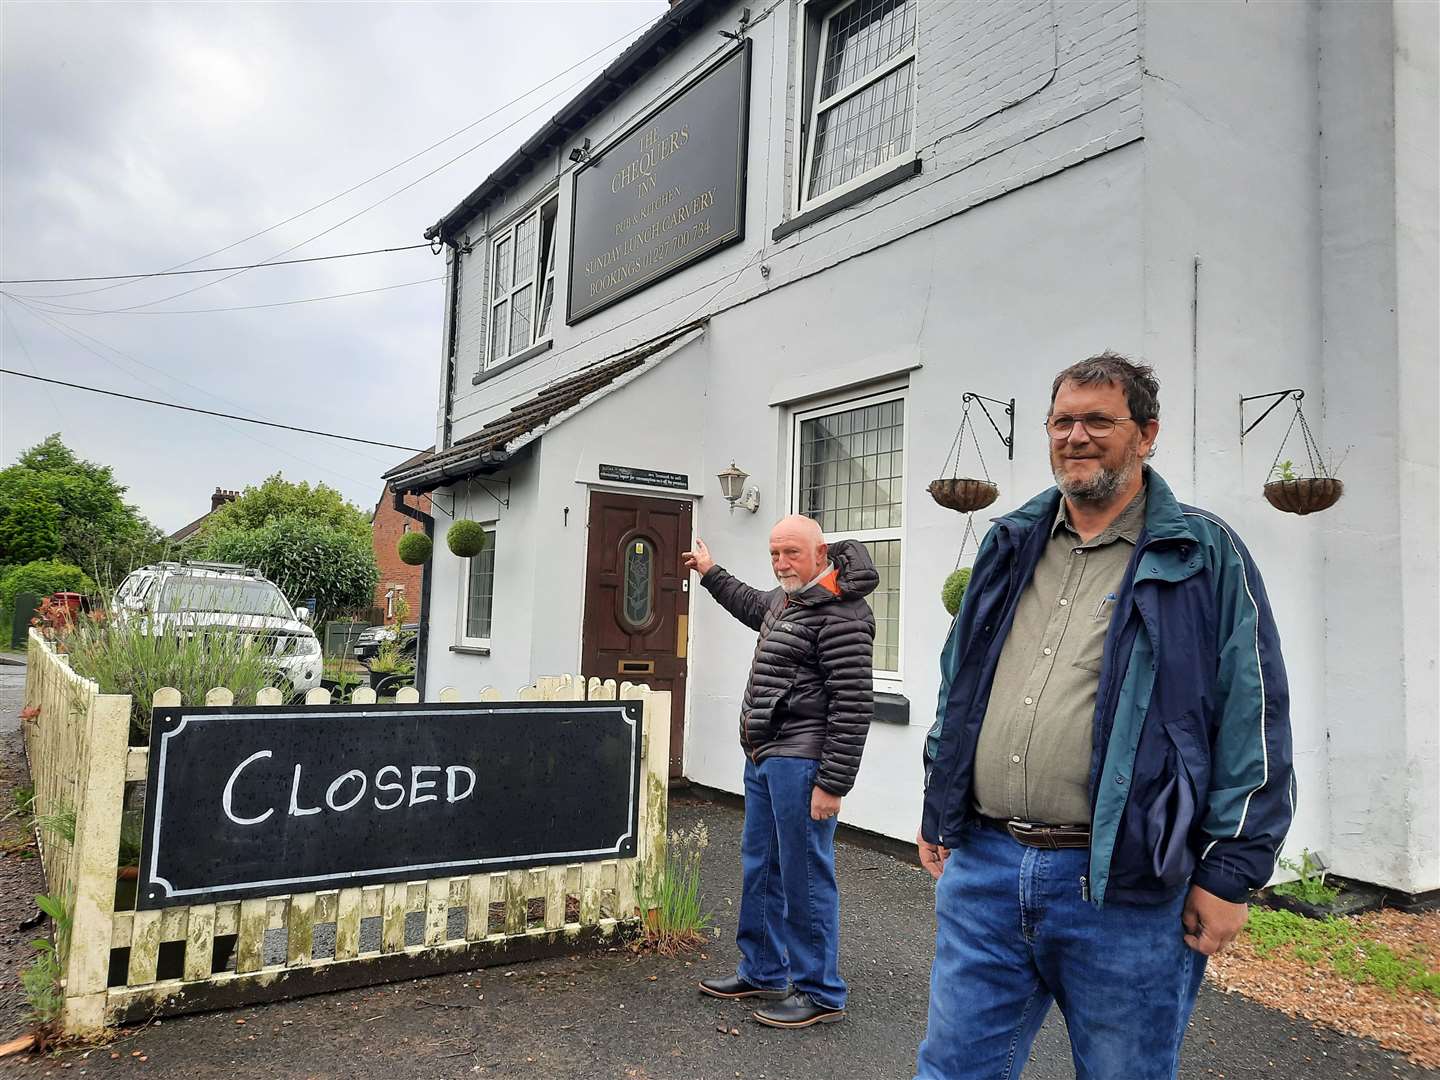 Norman Clark and Dane Henderson want to take over the Chequers pub in Petham